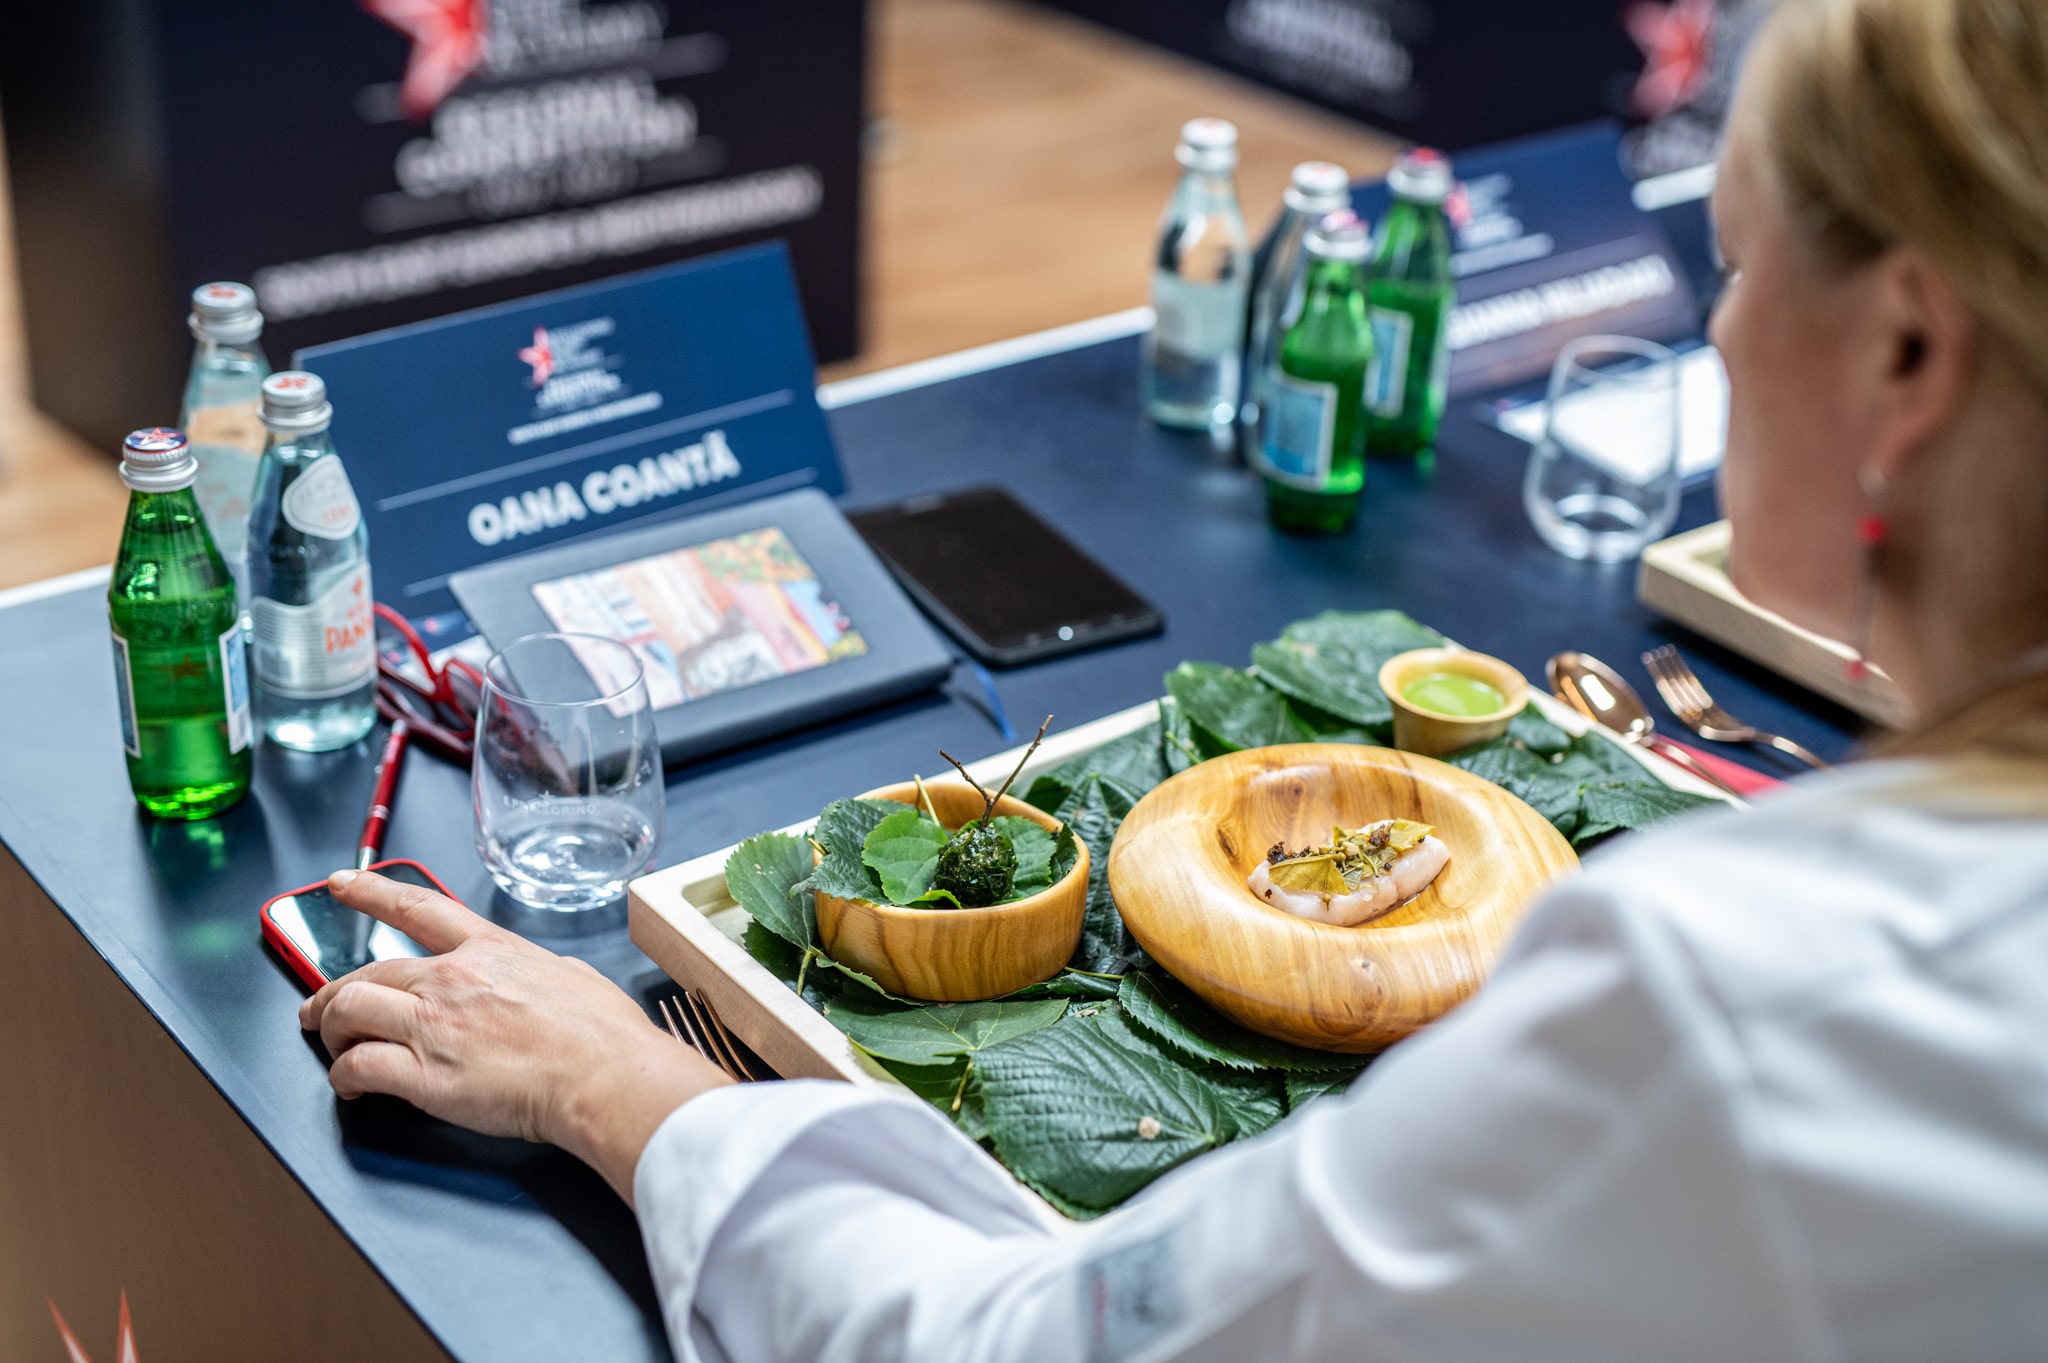 During the Regional Finals, a local jury of renowned chefs judged the live cooking competitions in fifteen different regions.